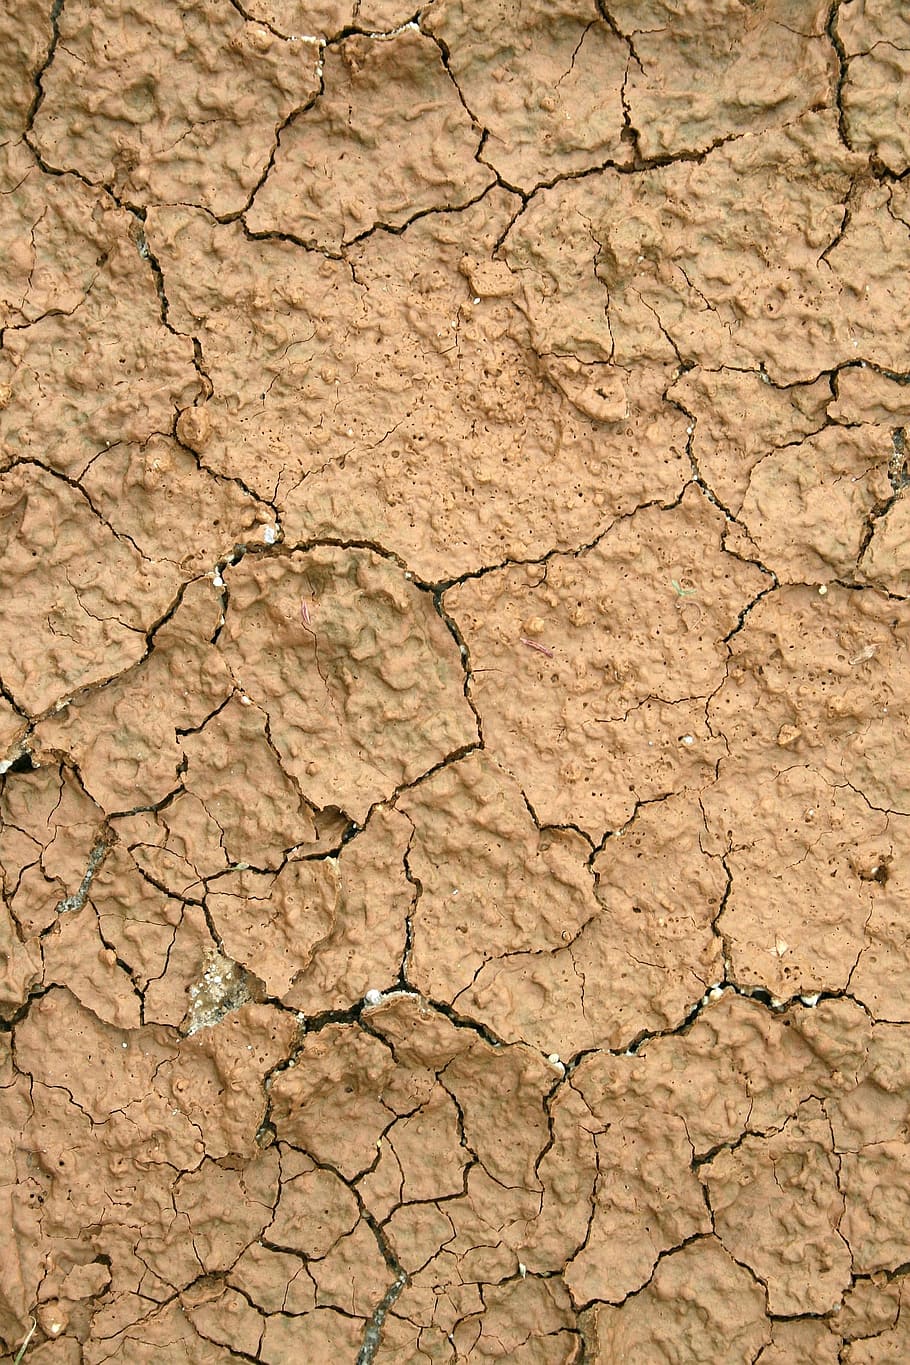 Soil, Mud, Crack, Dry, Drought, the luxury cruise ship, surface, structure, clay, sample